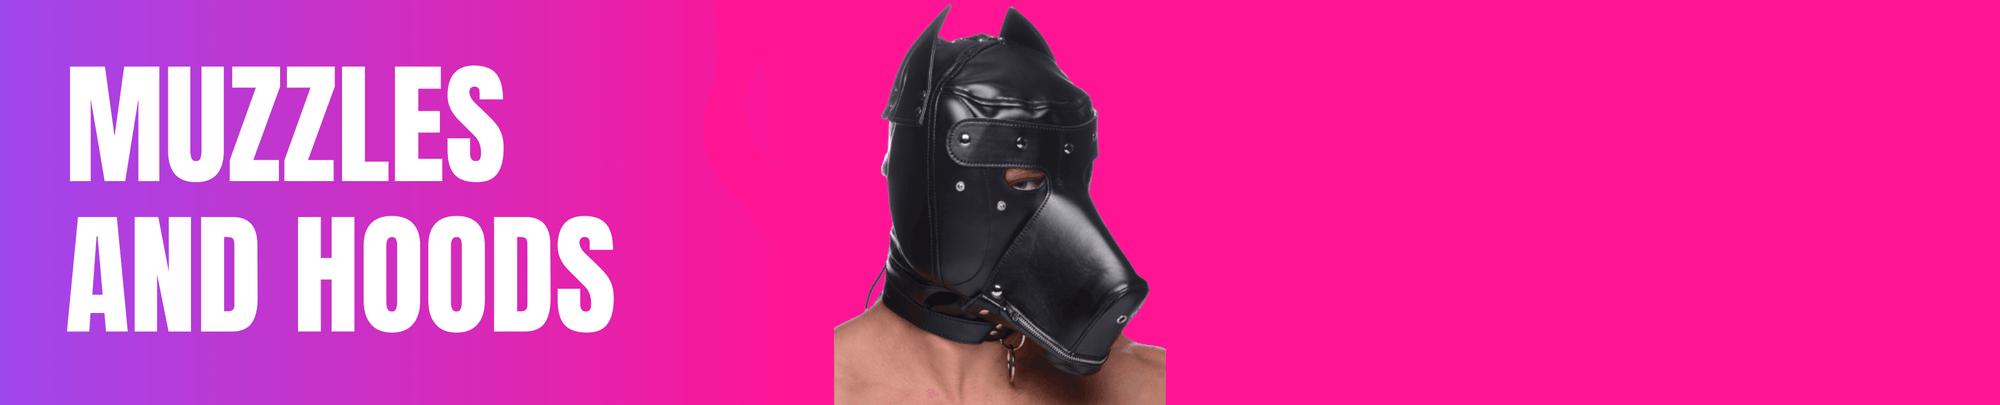 Muzzles and Hoods